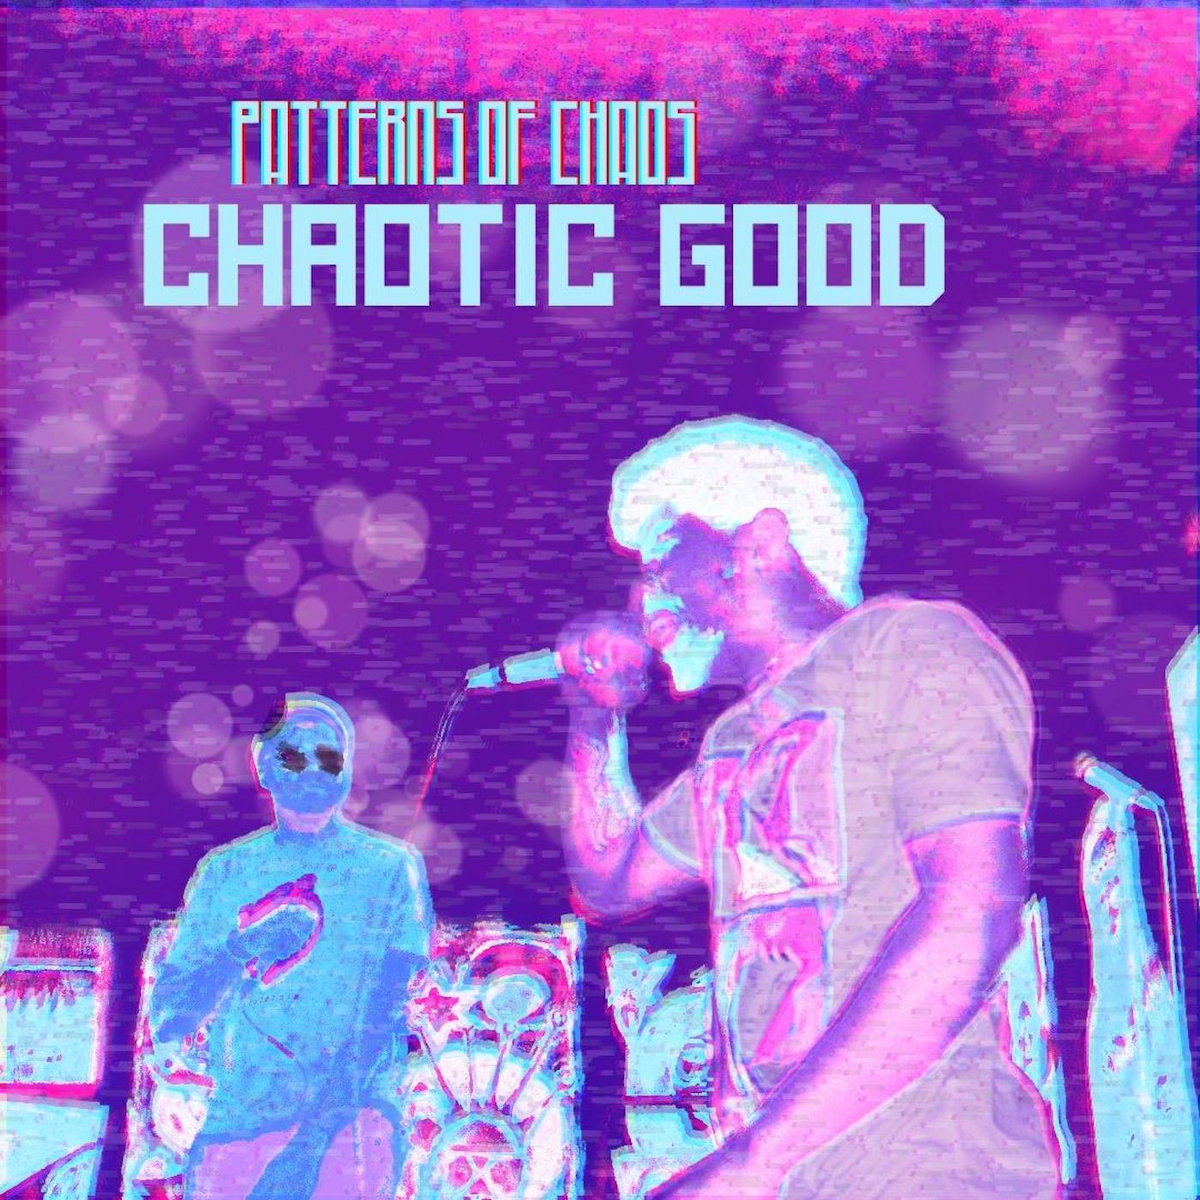 Cincinnati Rap Band, Patterns Of Chaos, To Release 'CHAOTIC GOOD' Album On Streaming Services